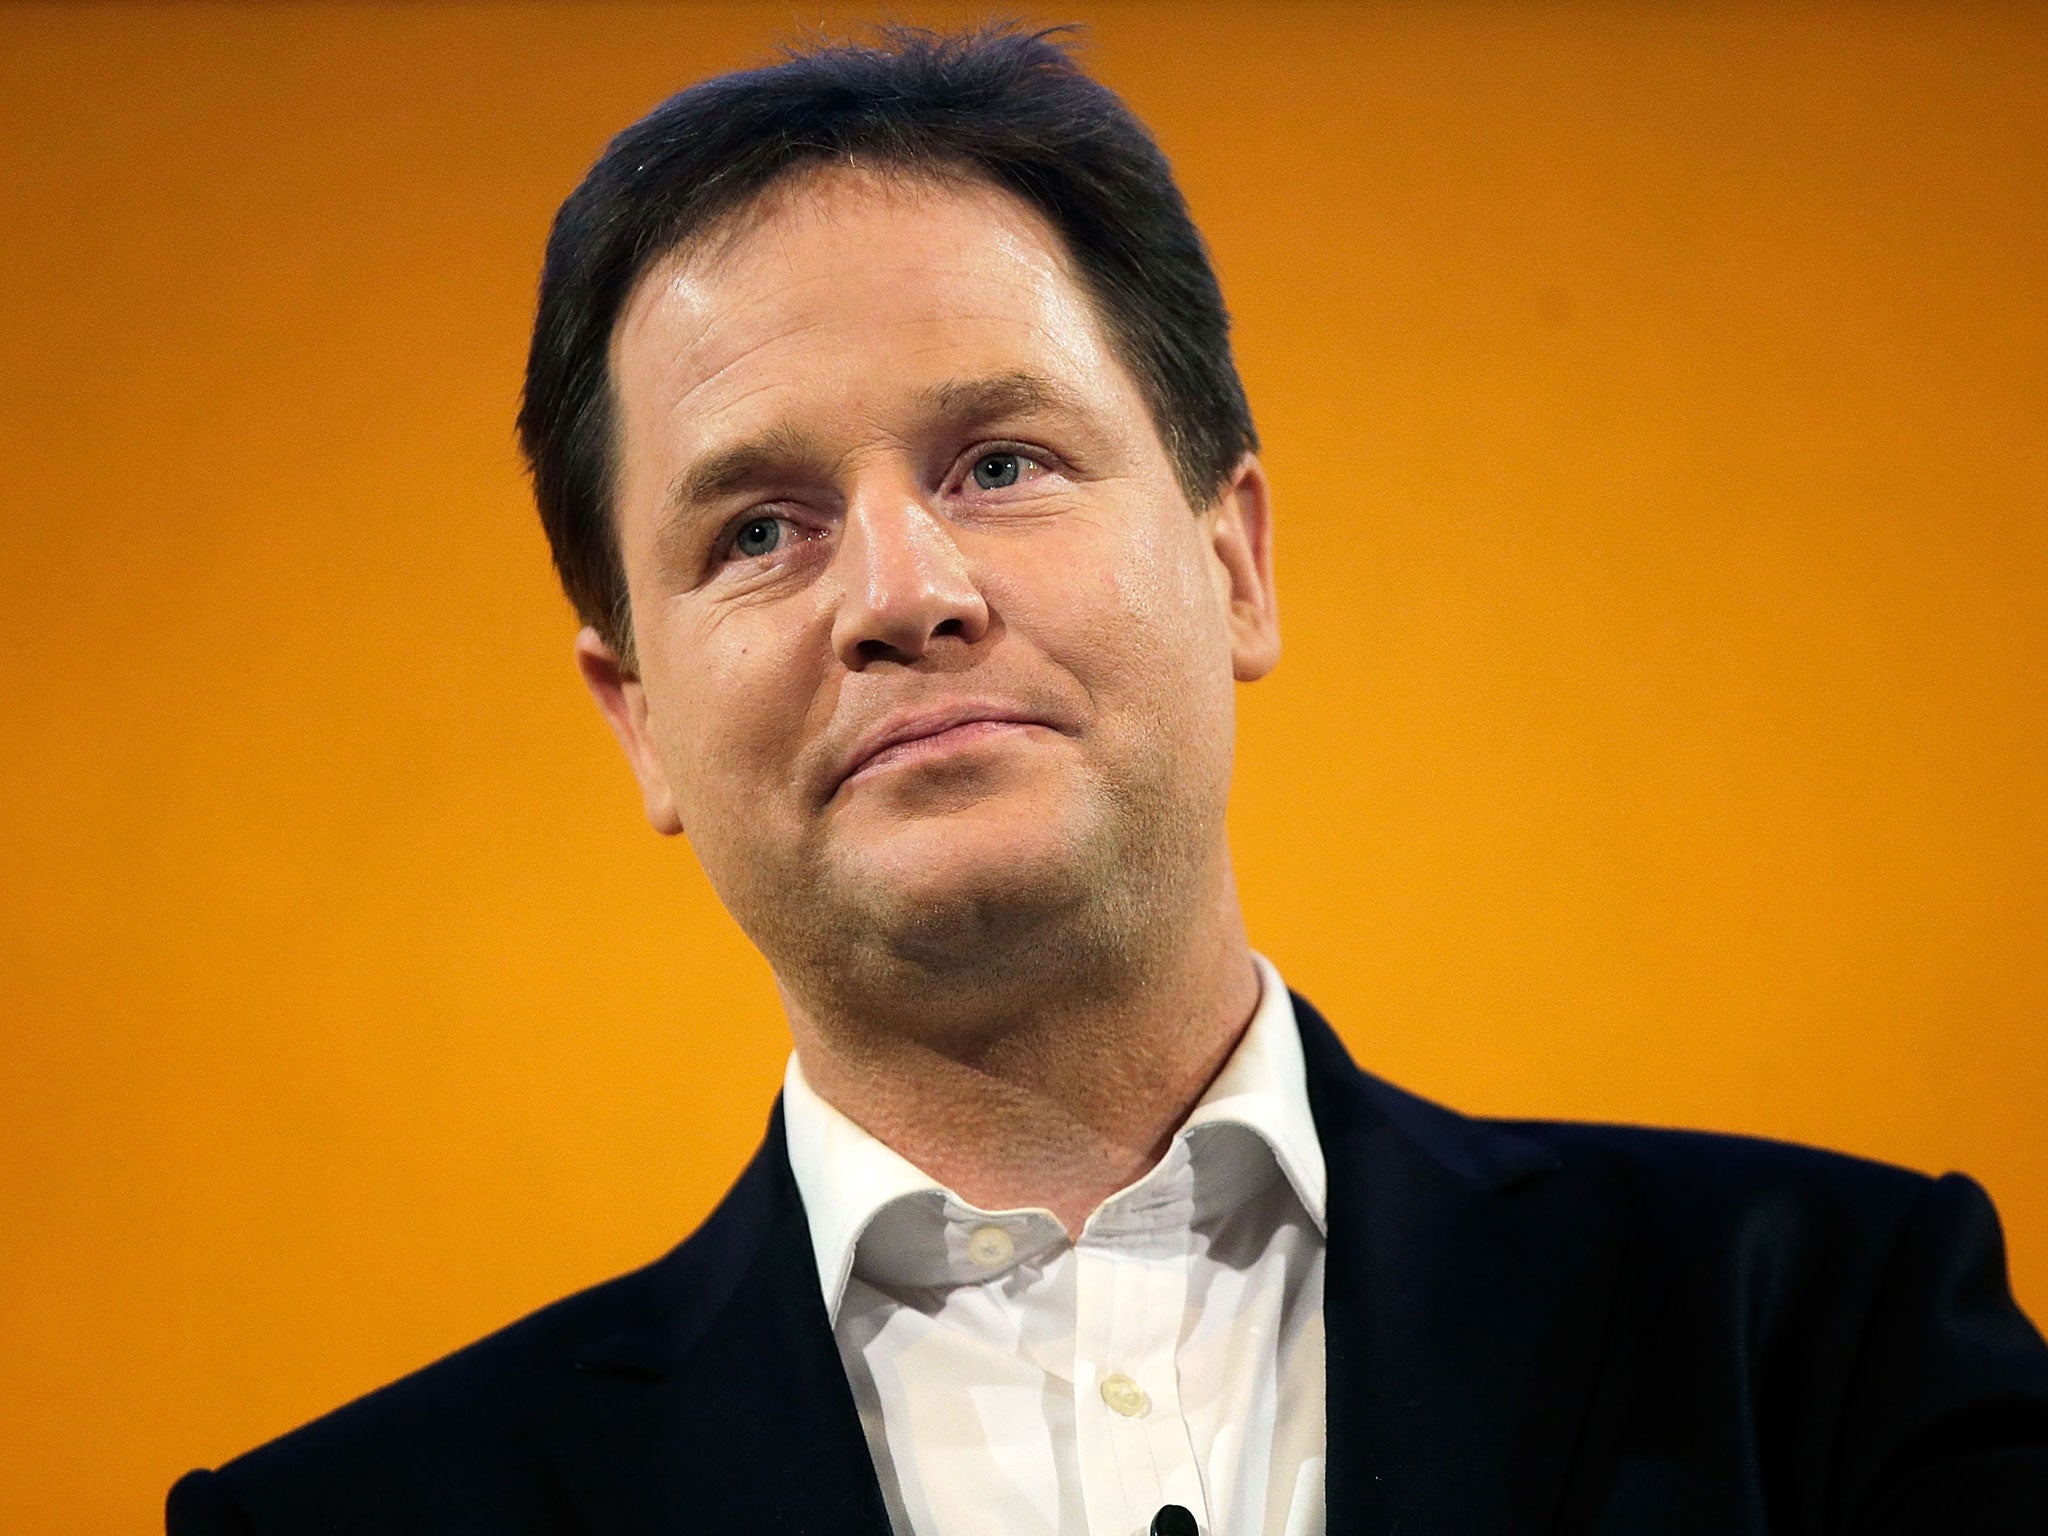 The Liberal Democrat spring conference snubbed Nick Clegg today by overwhelmingly rejecting the Government’s plans to approve “secret courts” to hear evidence in private in civil cases.